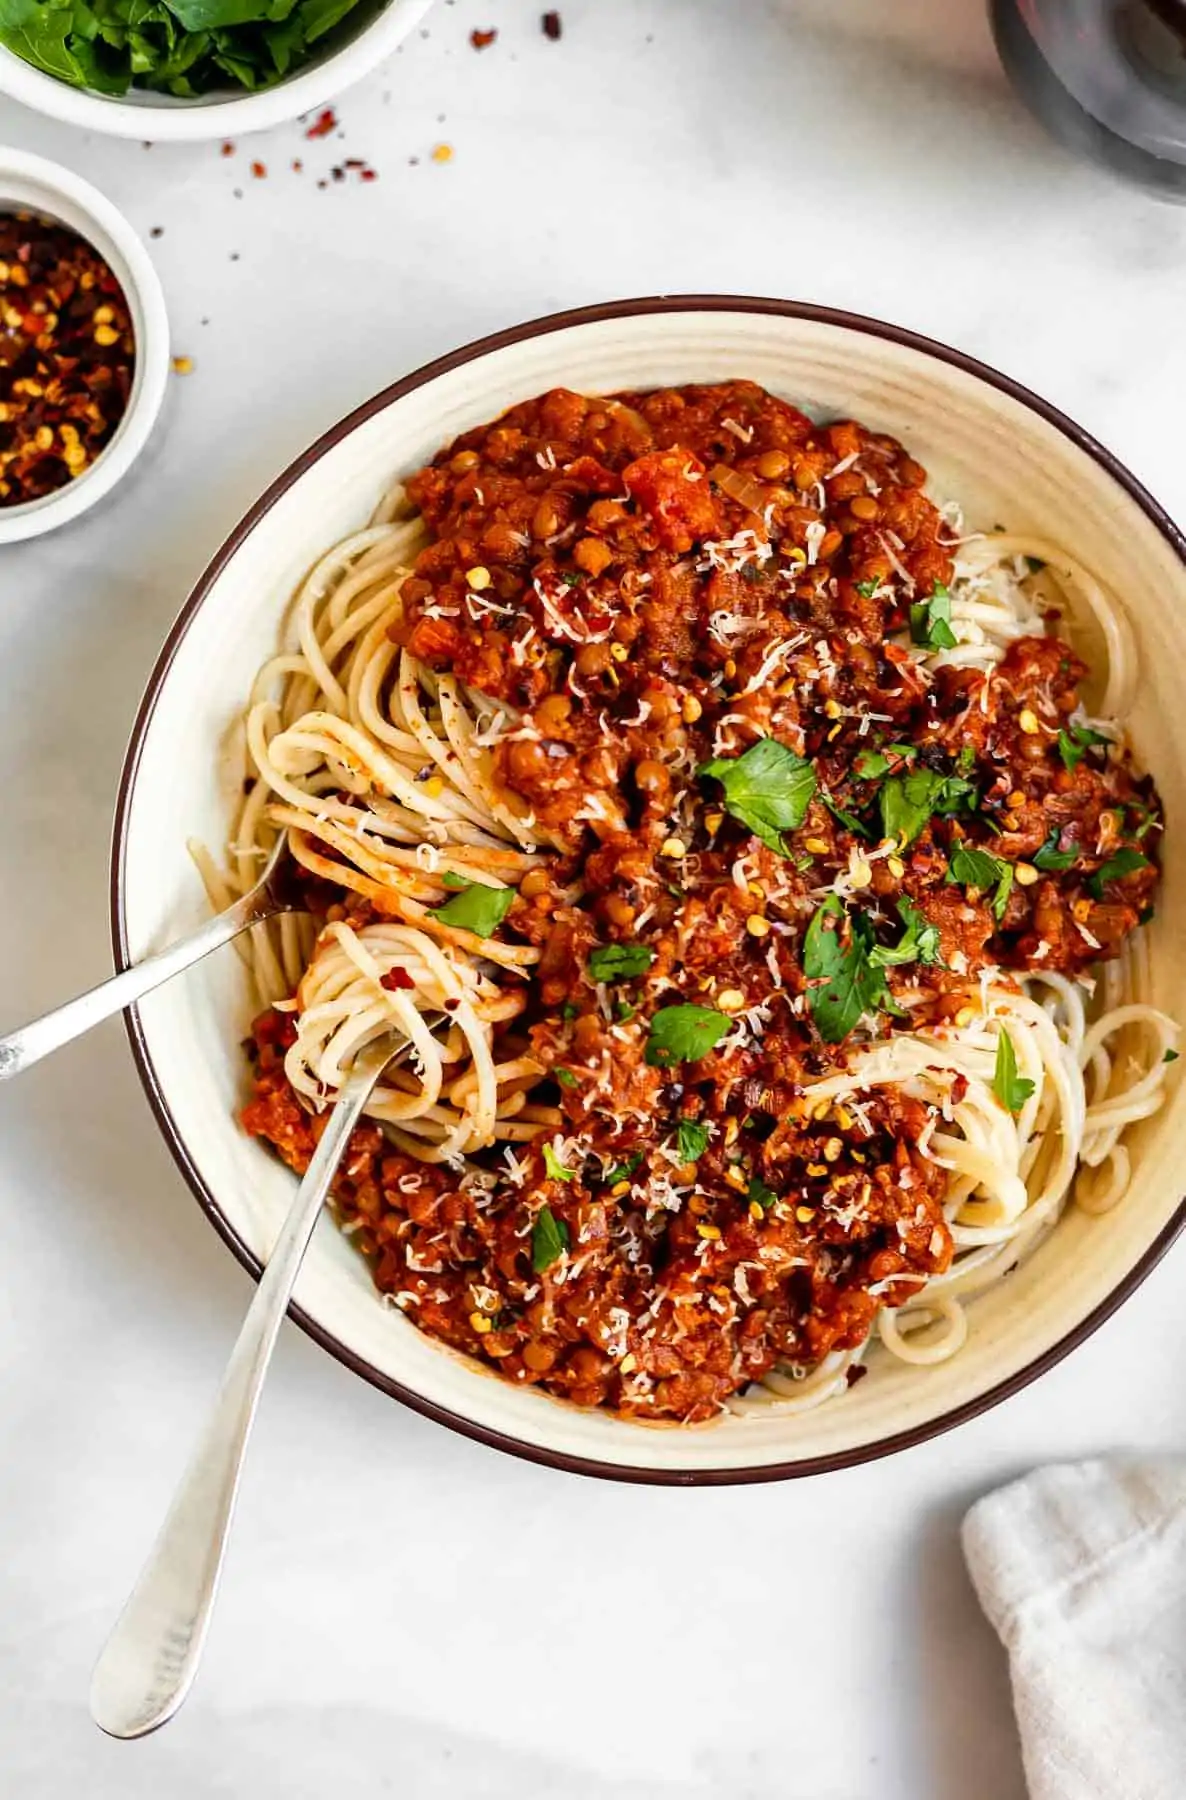 Vegan lentil bolognese in a bowl of spaghetti with parsley on top.